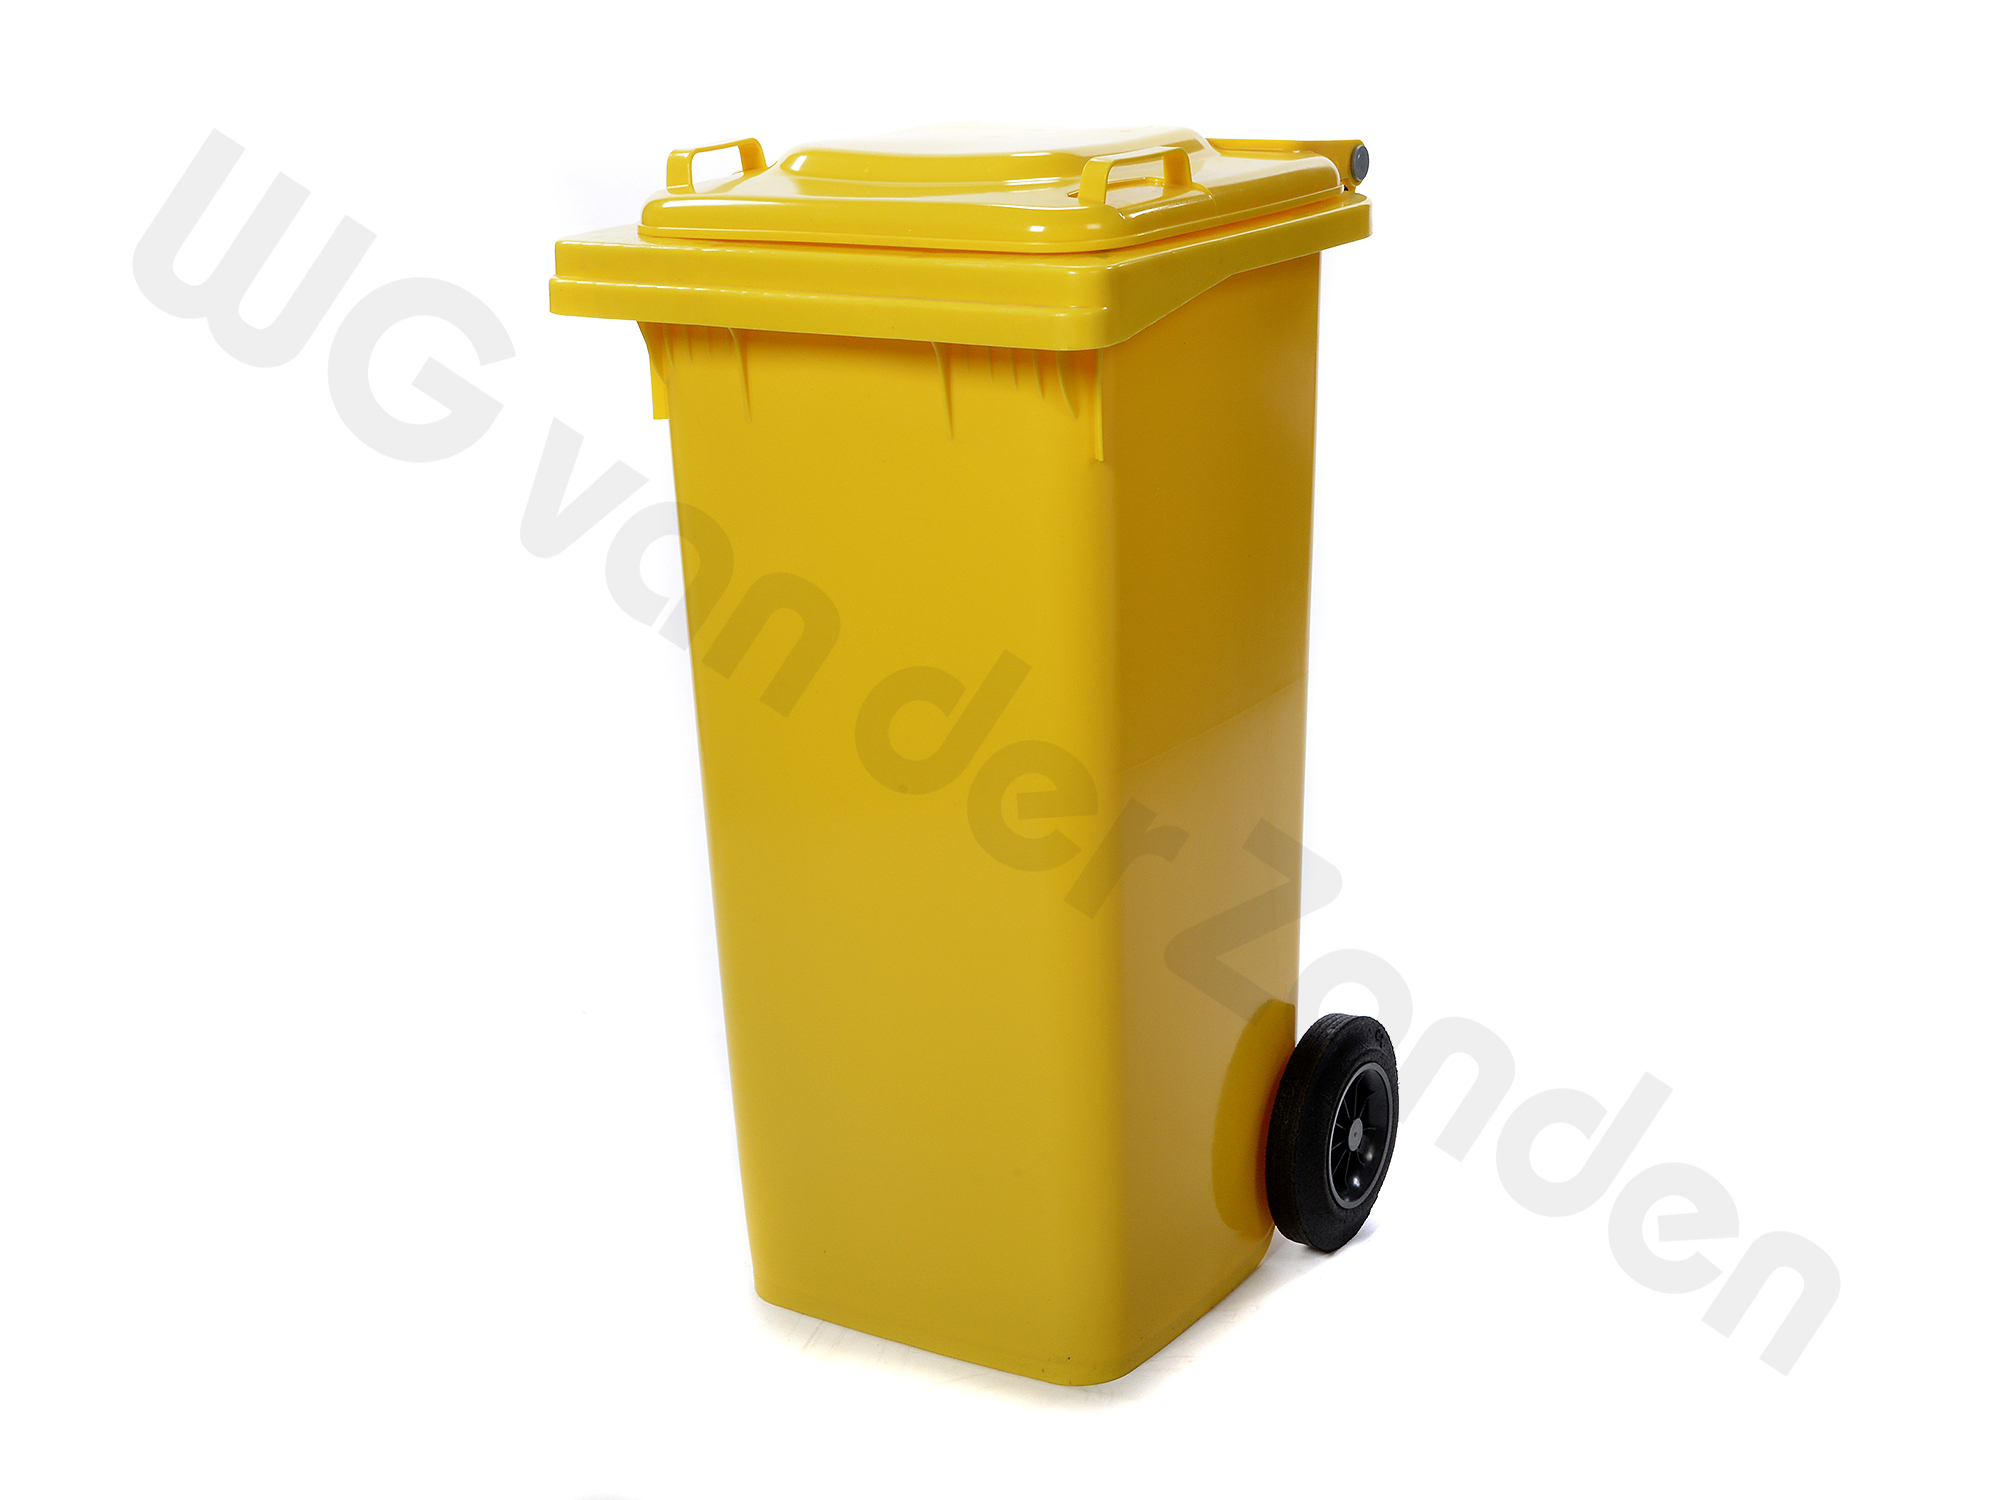 440142 GARBAGE CONTAINER 120 LTR PLASTIC TWO WHEELED YELLOW